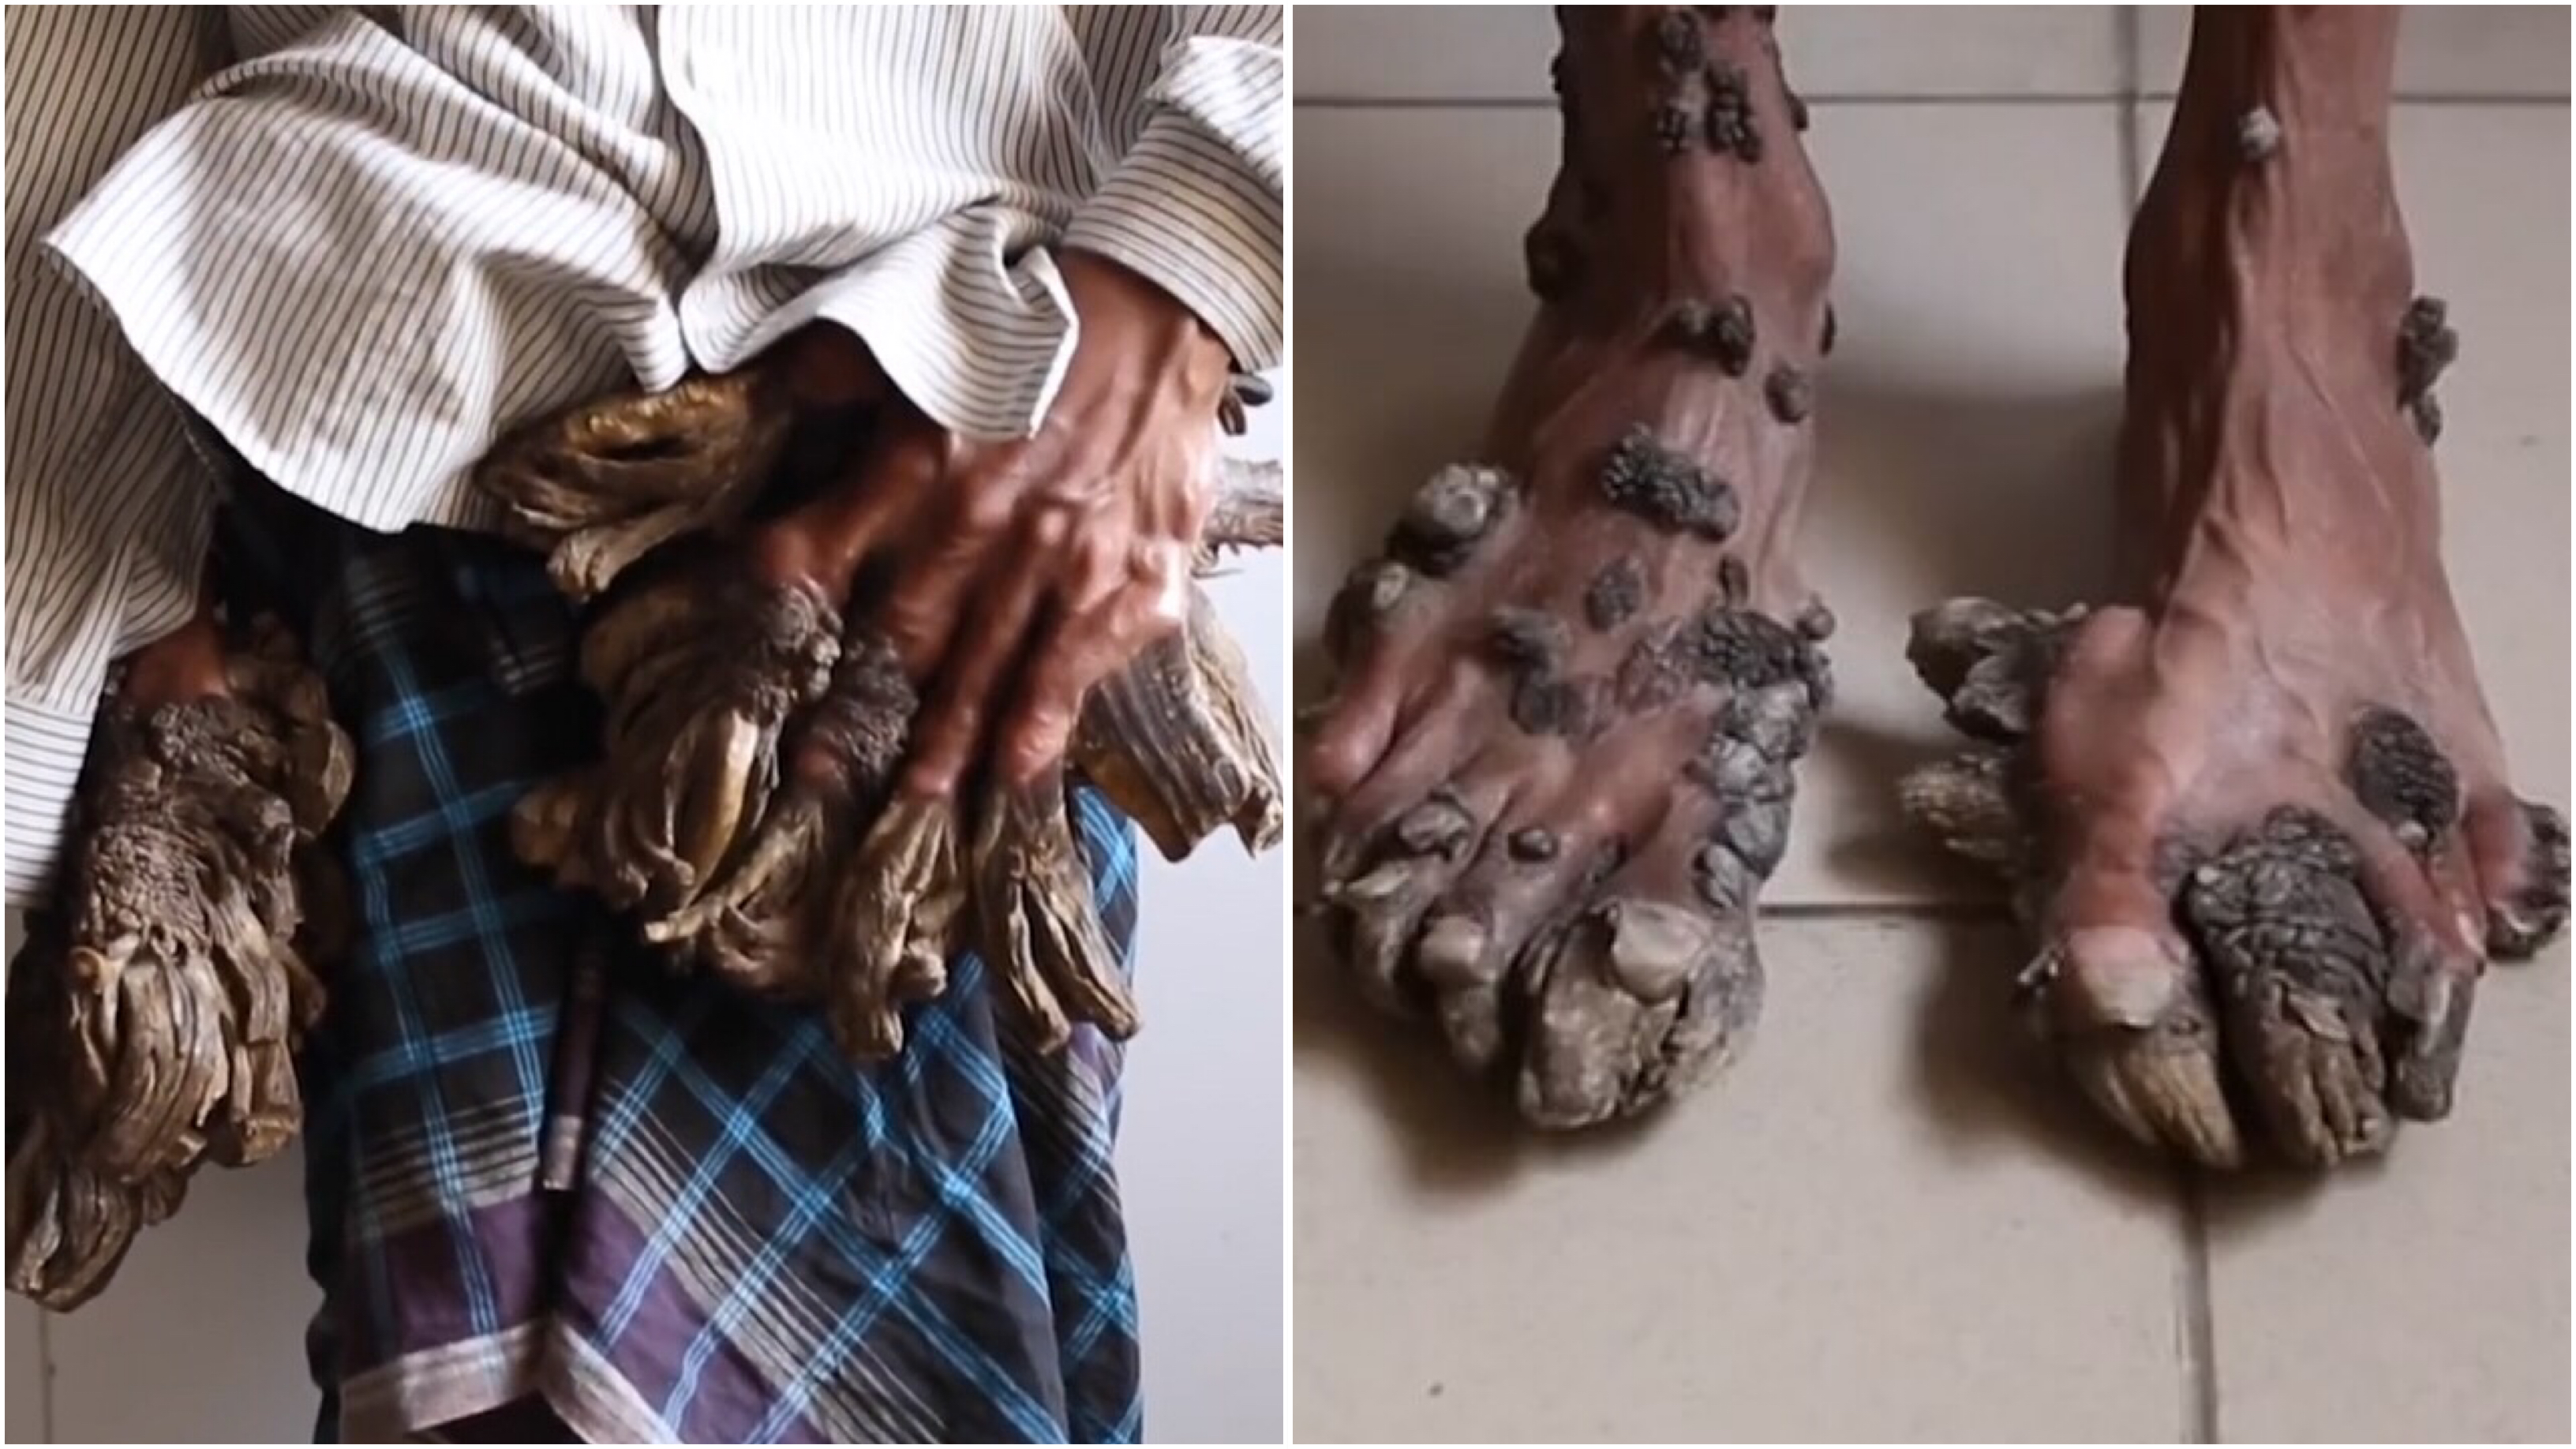 Asia news: Bangladeshi tree man requires more surgeries on growths